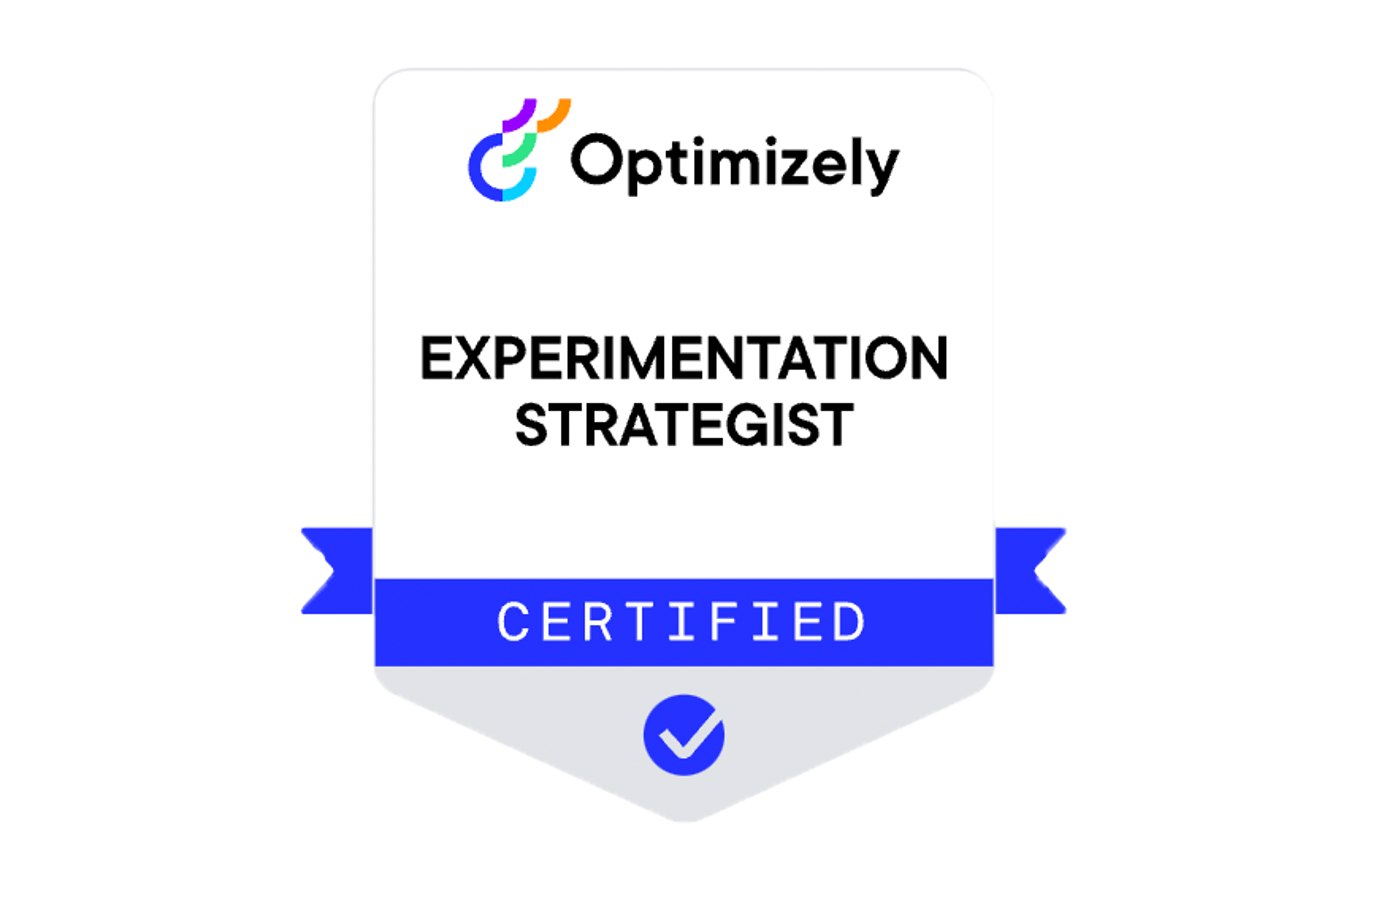 Certified Optimizely Experimentation Specialist